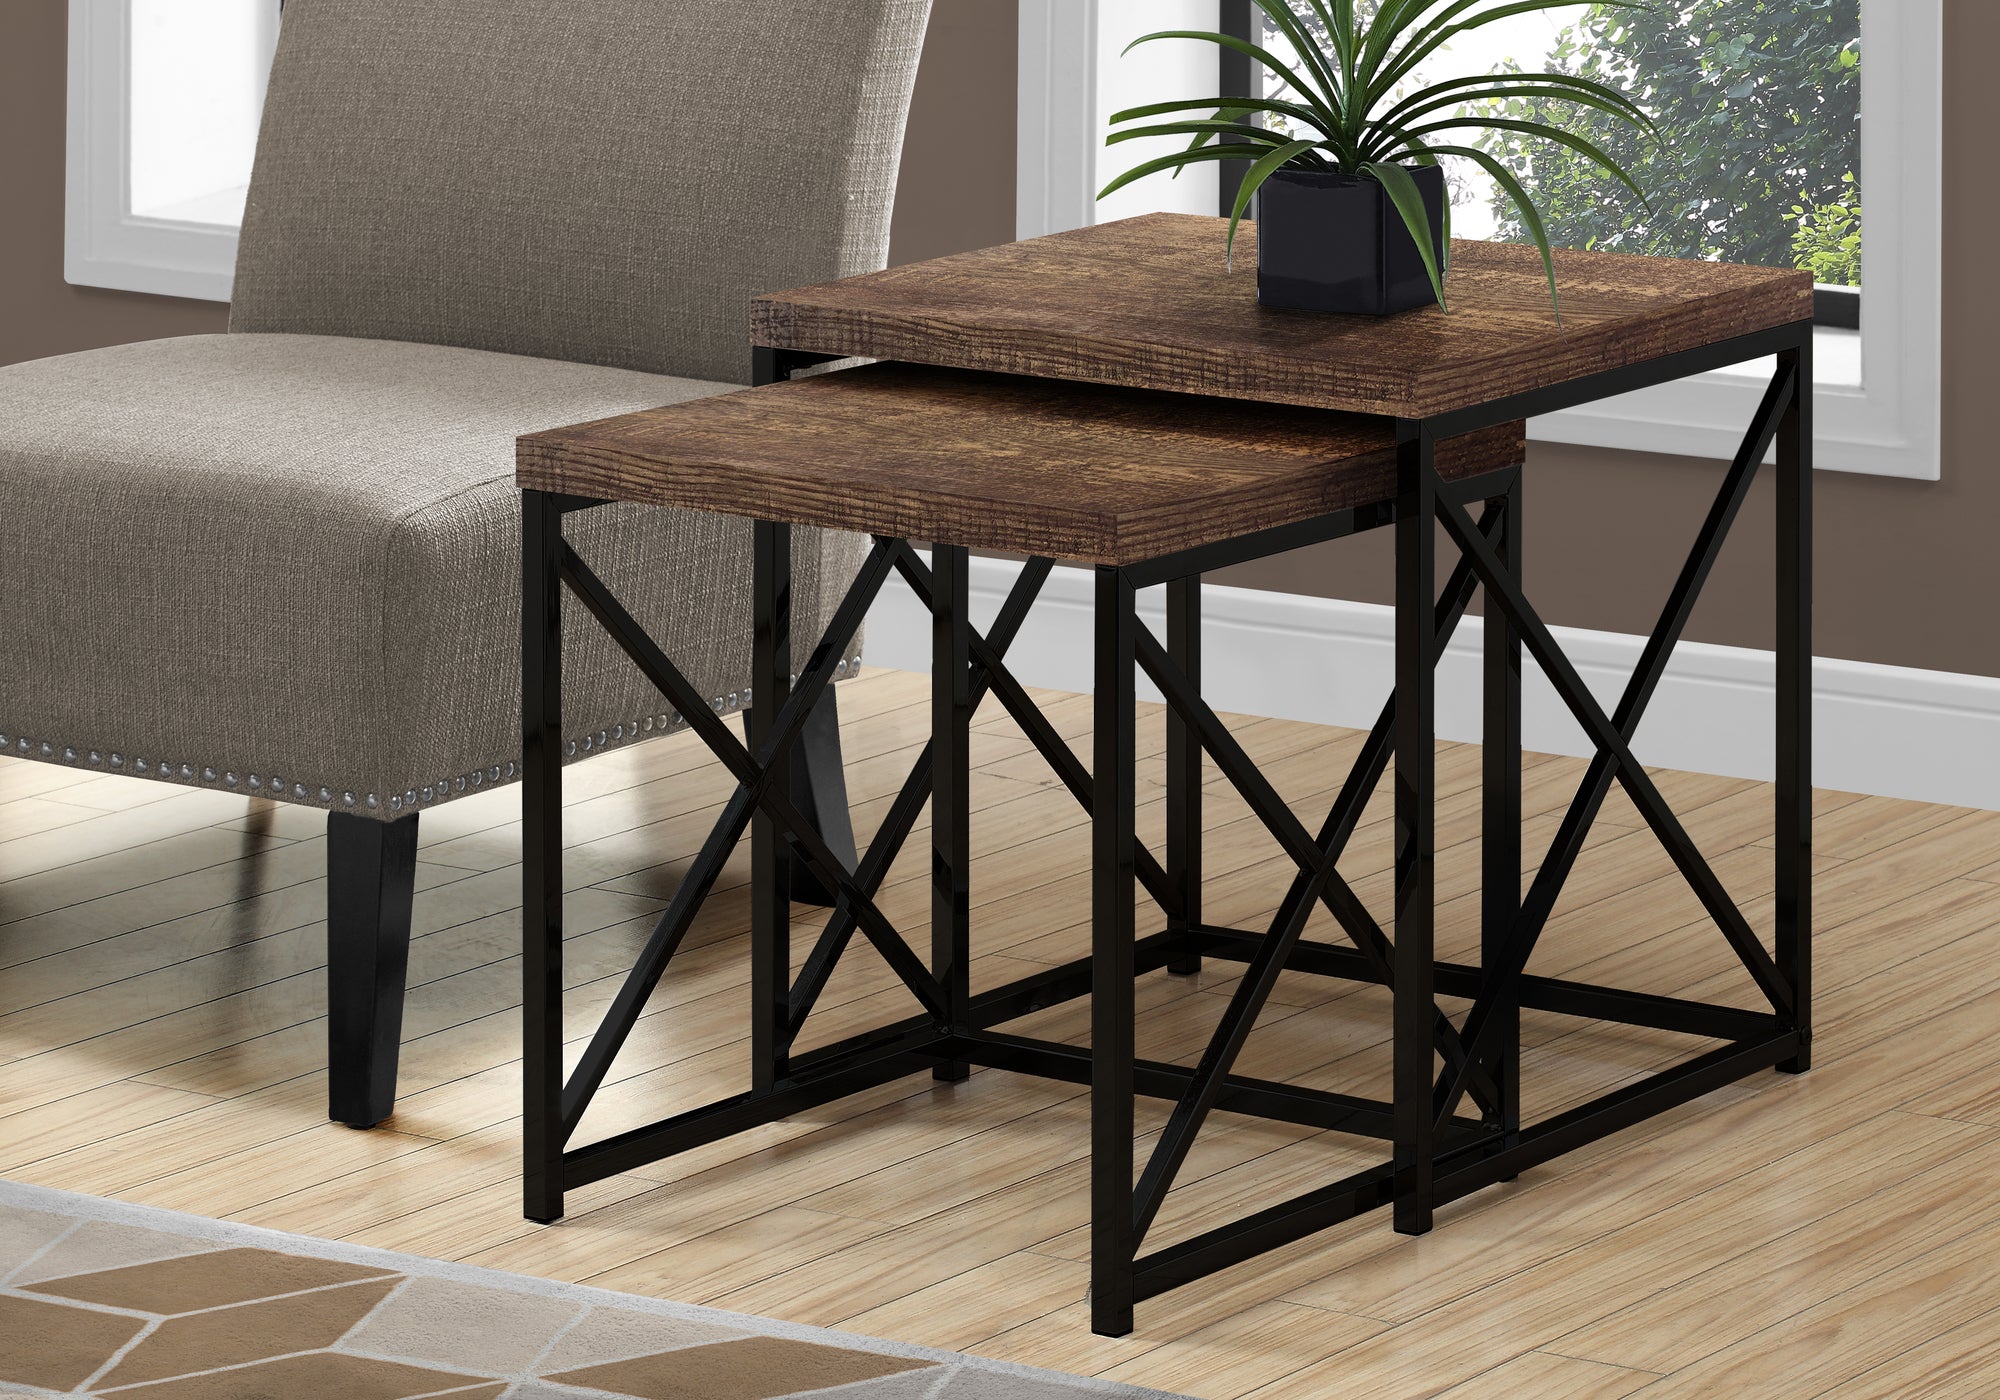 MN-533413    Nesting Table, Set Of 2, Side, End, Metal, Accent, Living Room, Bedroom, Metal Base, Laminate, Brown Reclaimed Wood Look, Black, Contemporary, Modern